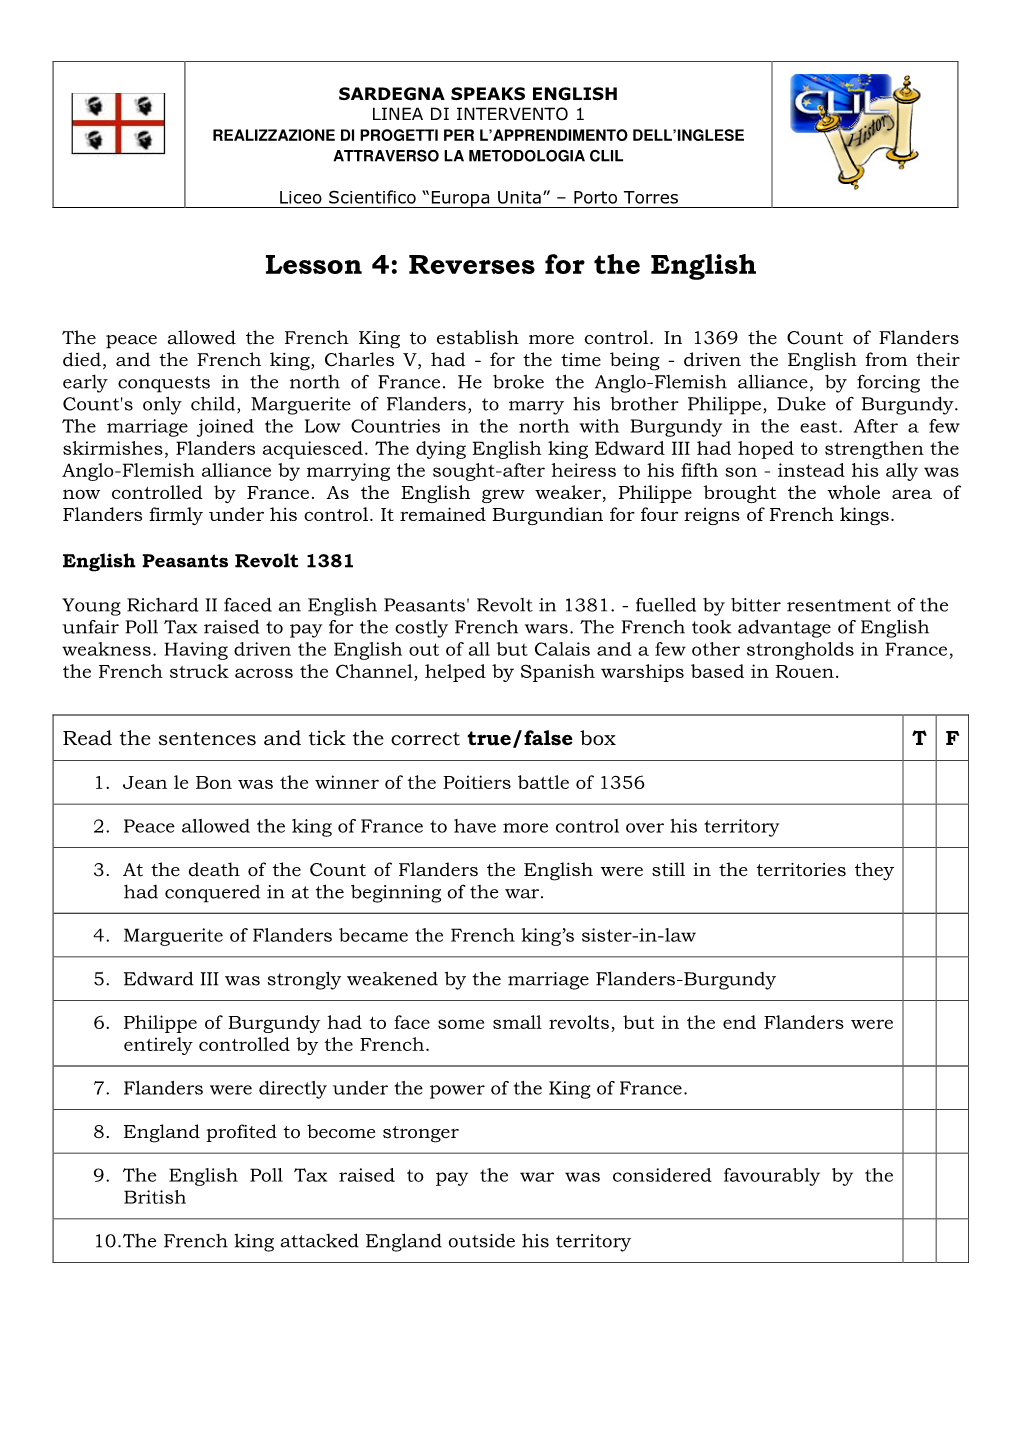 Lesson 4: Reverses for the English